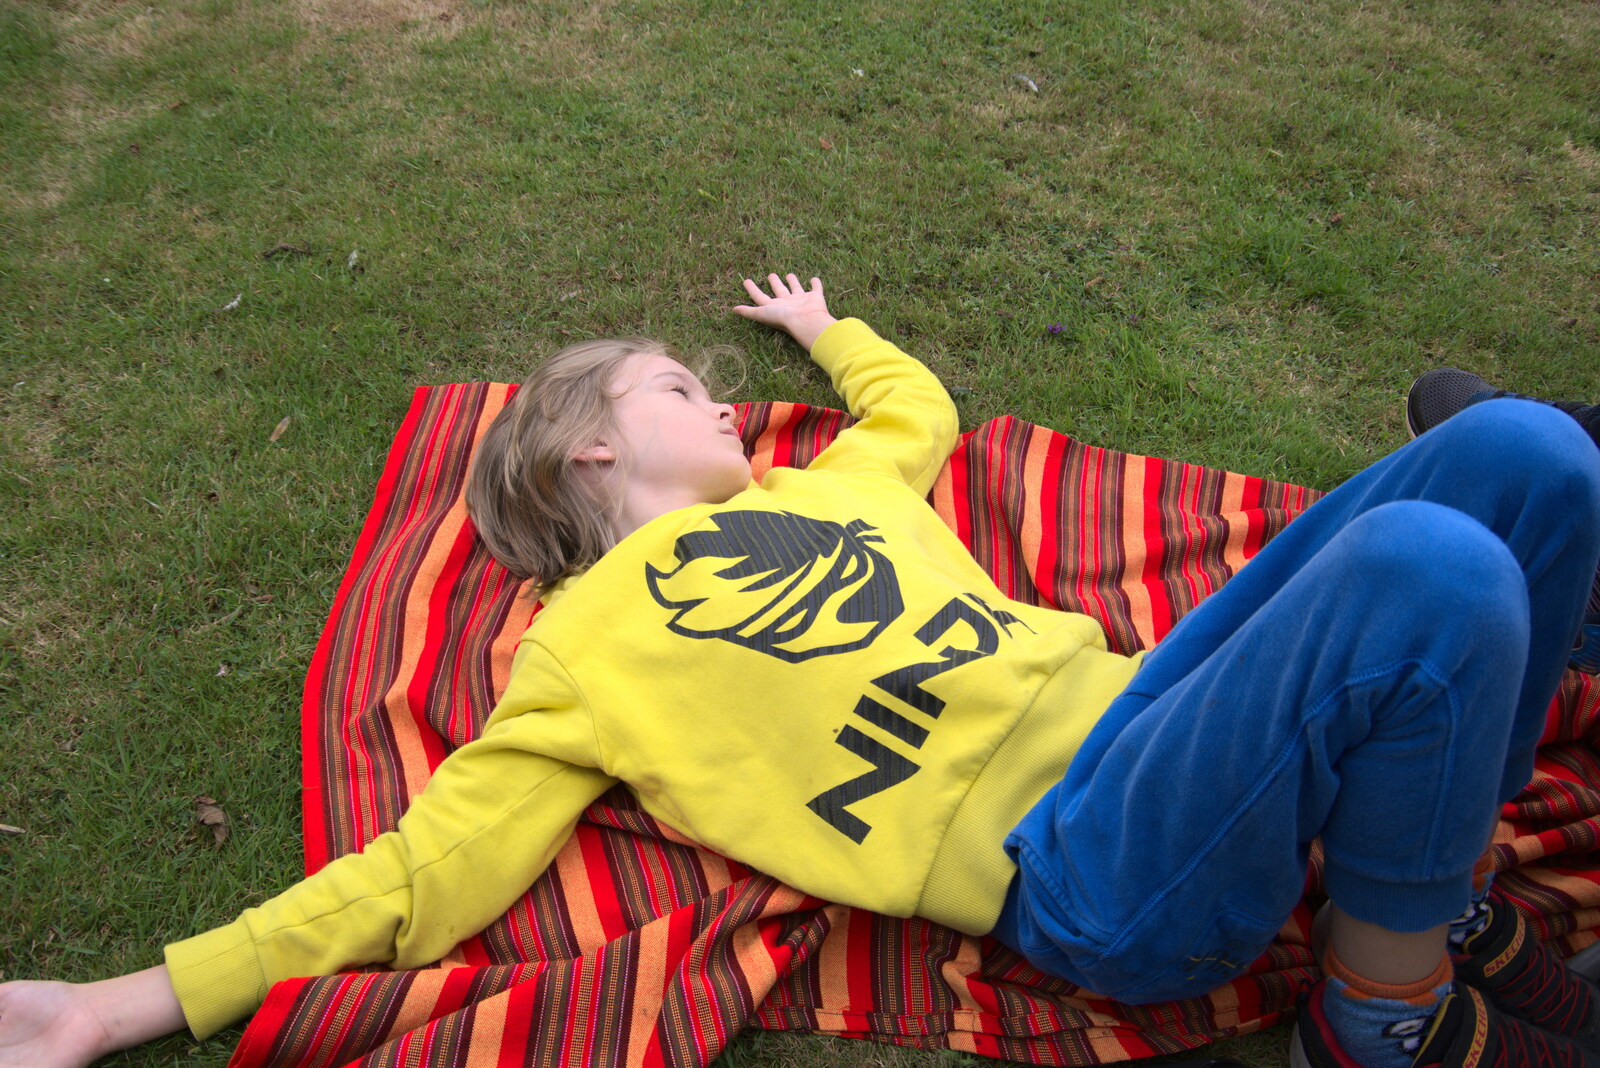 Camping at Three Rivers, Geldeston, Norfolk - 5th September 2020: Harry flakes out